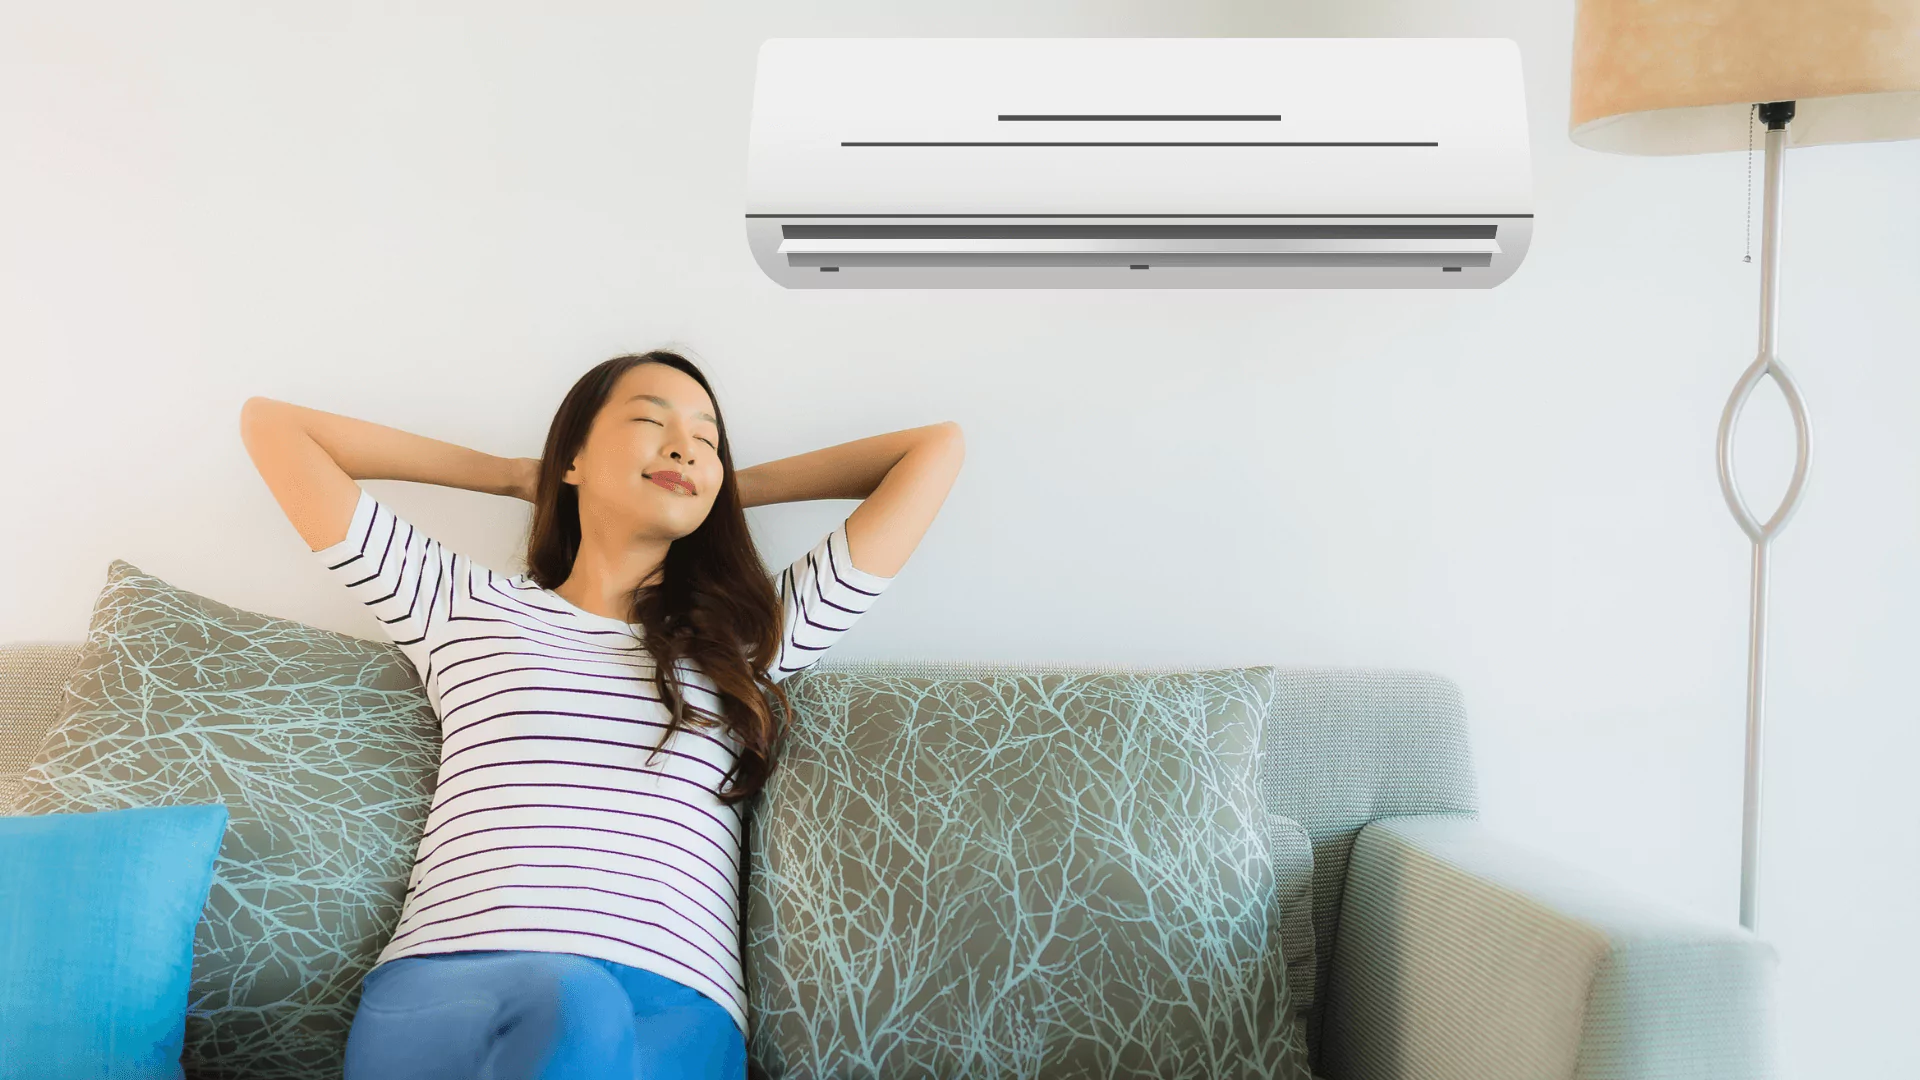 Heatwaves Harm Your Health! These AC Units Will Save You From Scorching Summers